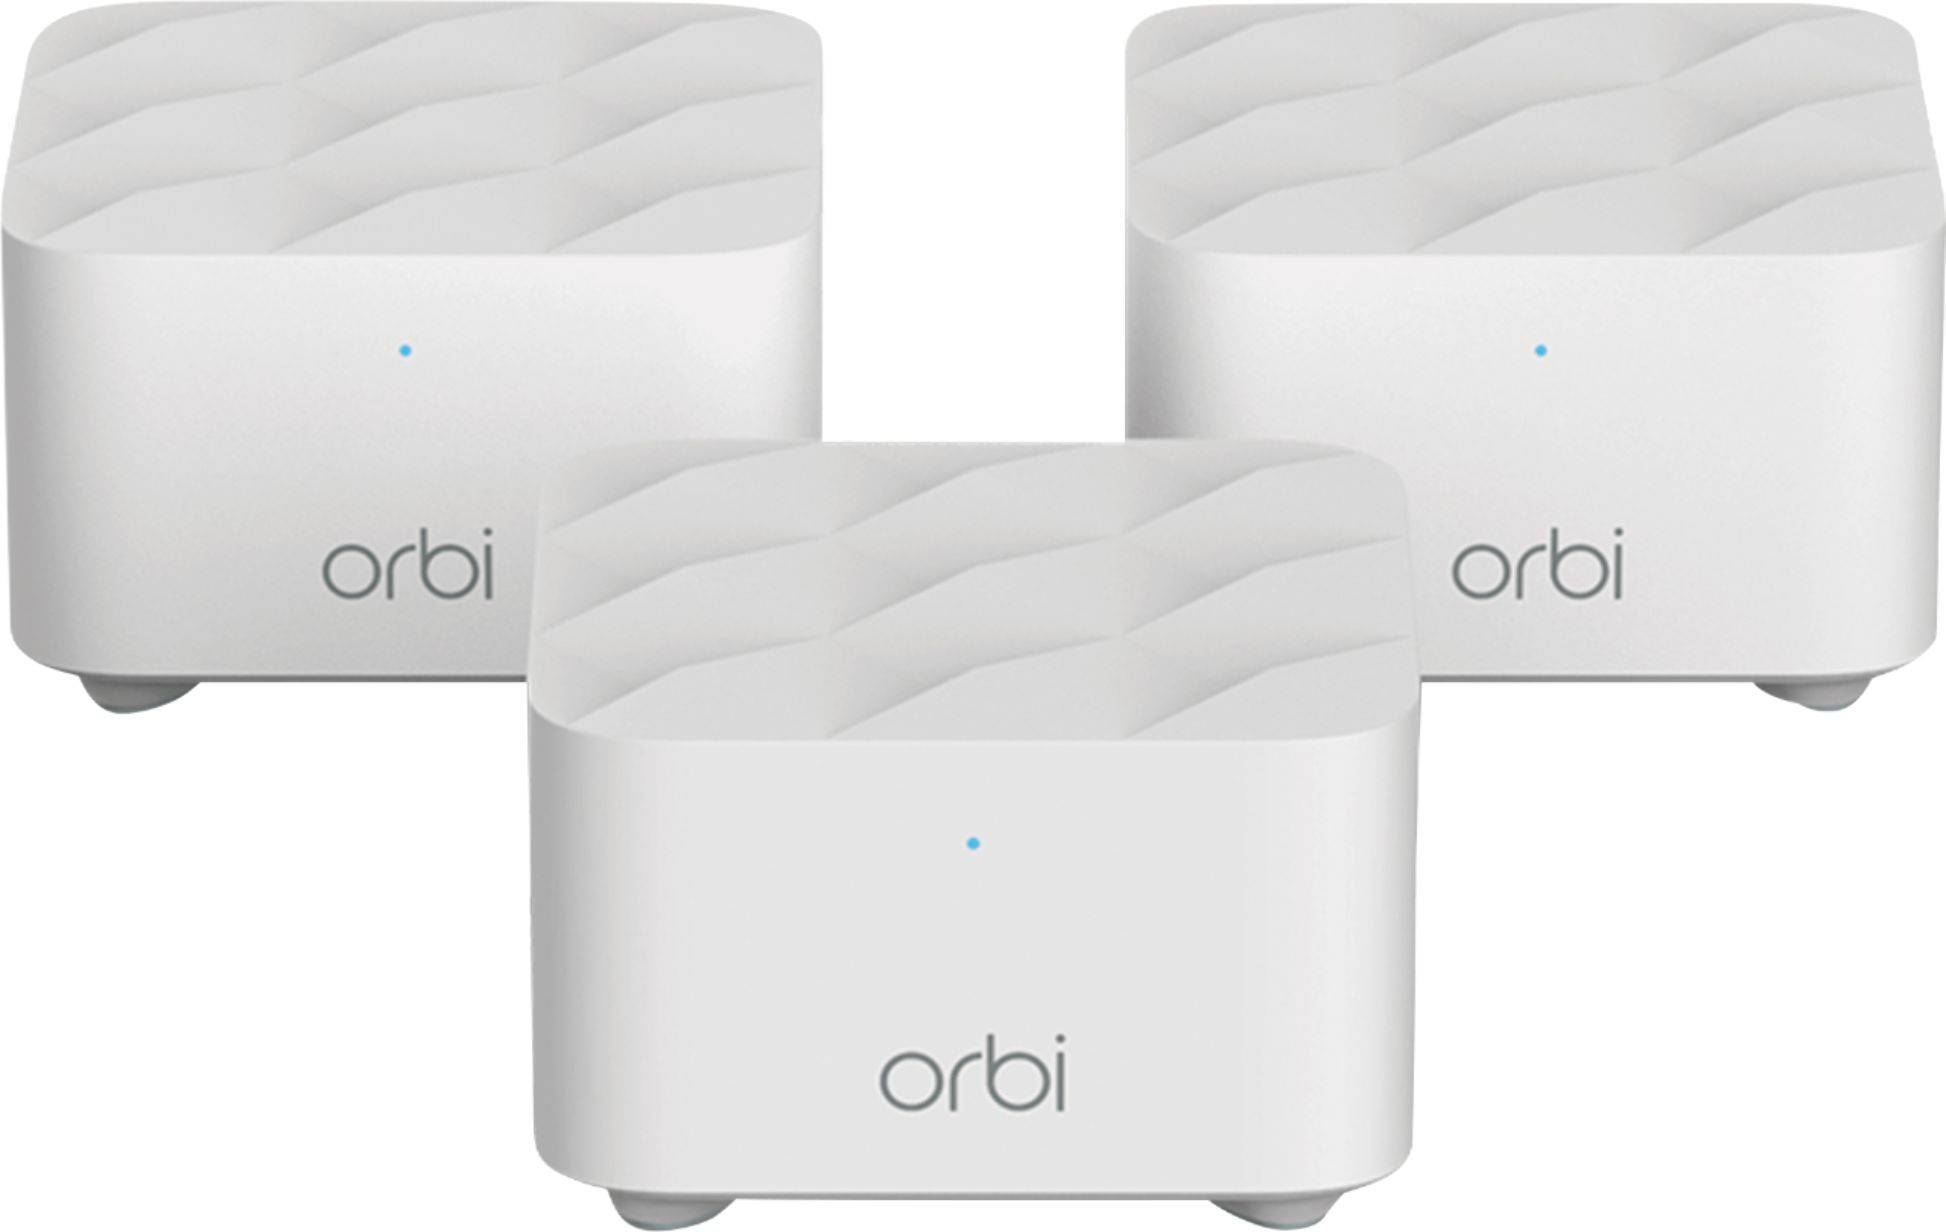 NETGEAR Orbi Whole Home Mesh WiFi System (RBK13) – Router replacement  covers up to 4,500 sq. ft. with 1 Router & 2 Satellites